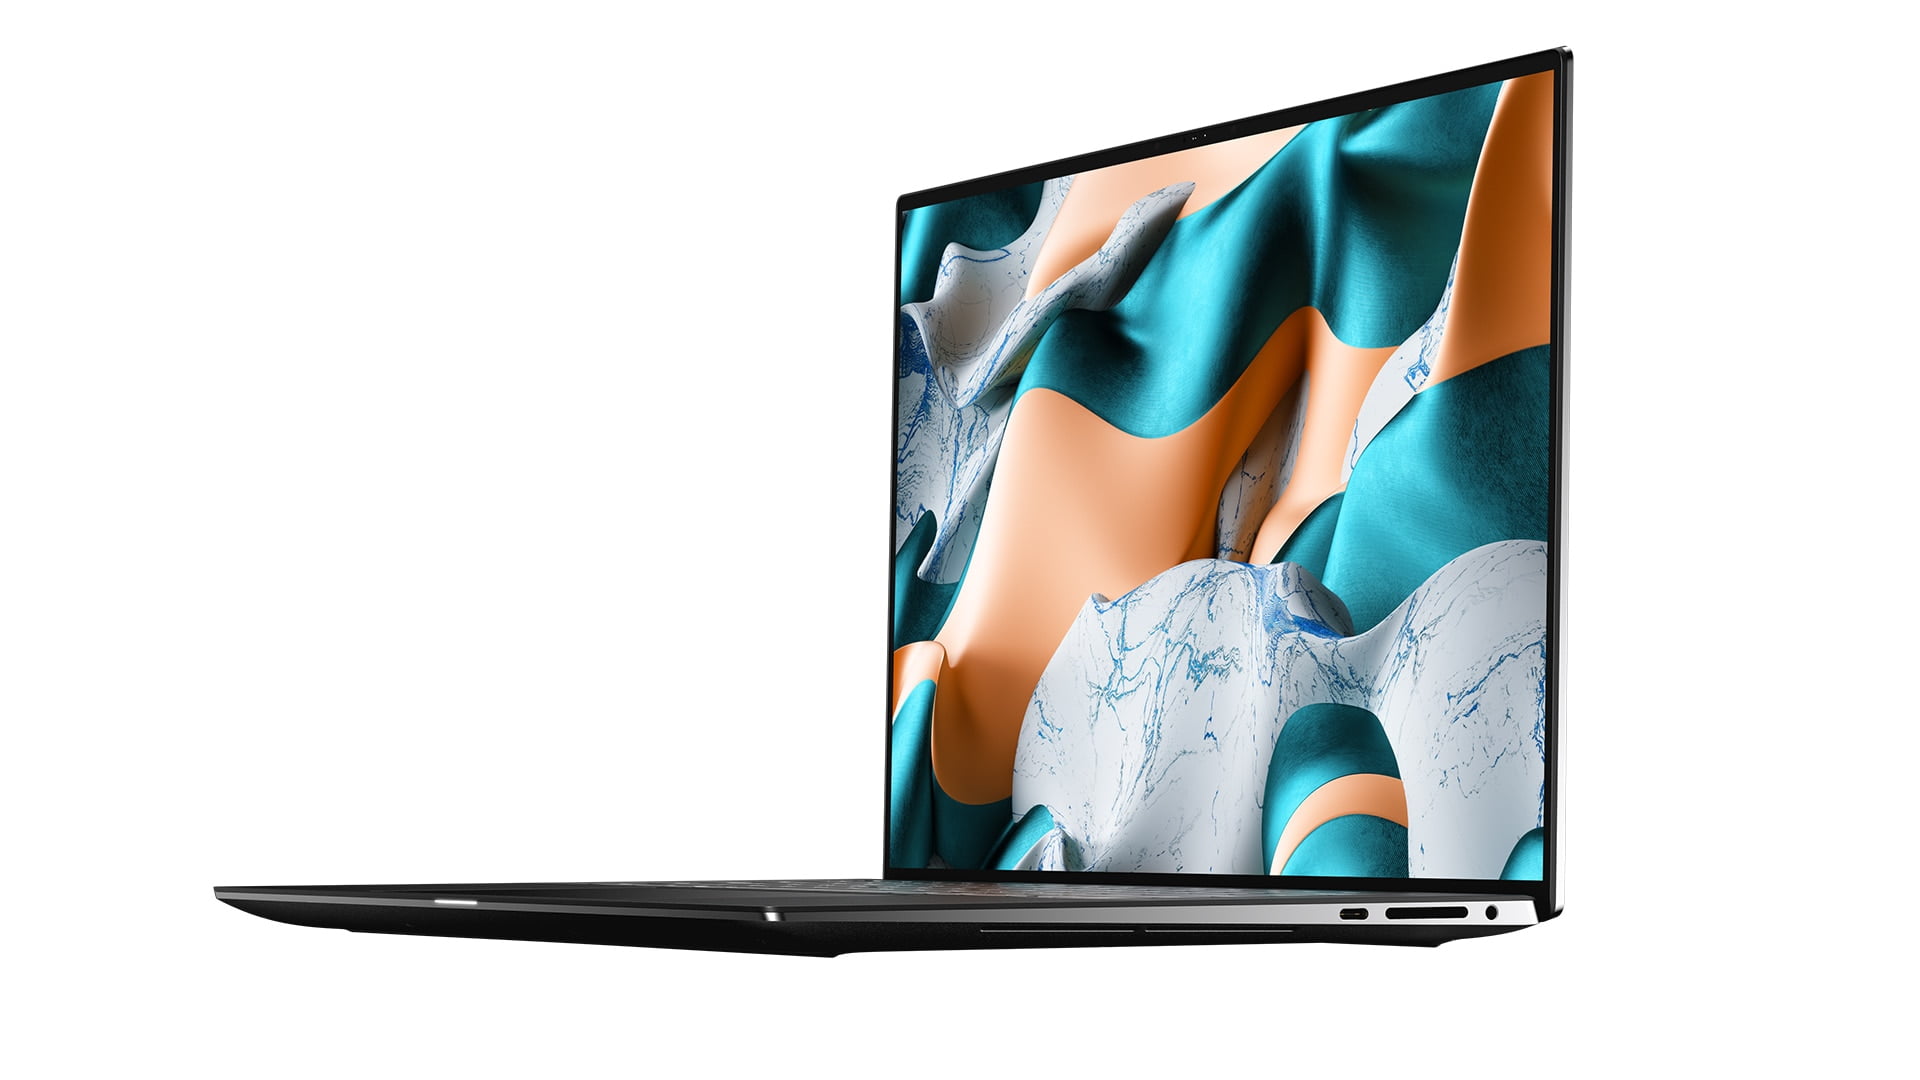 Dell XPS 15 9500 Info: Why This New XPS Model Should Not be Overlooked